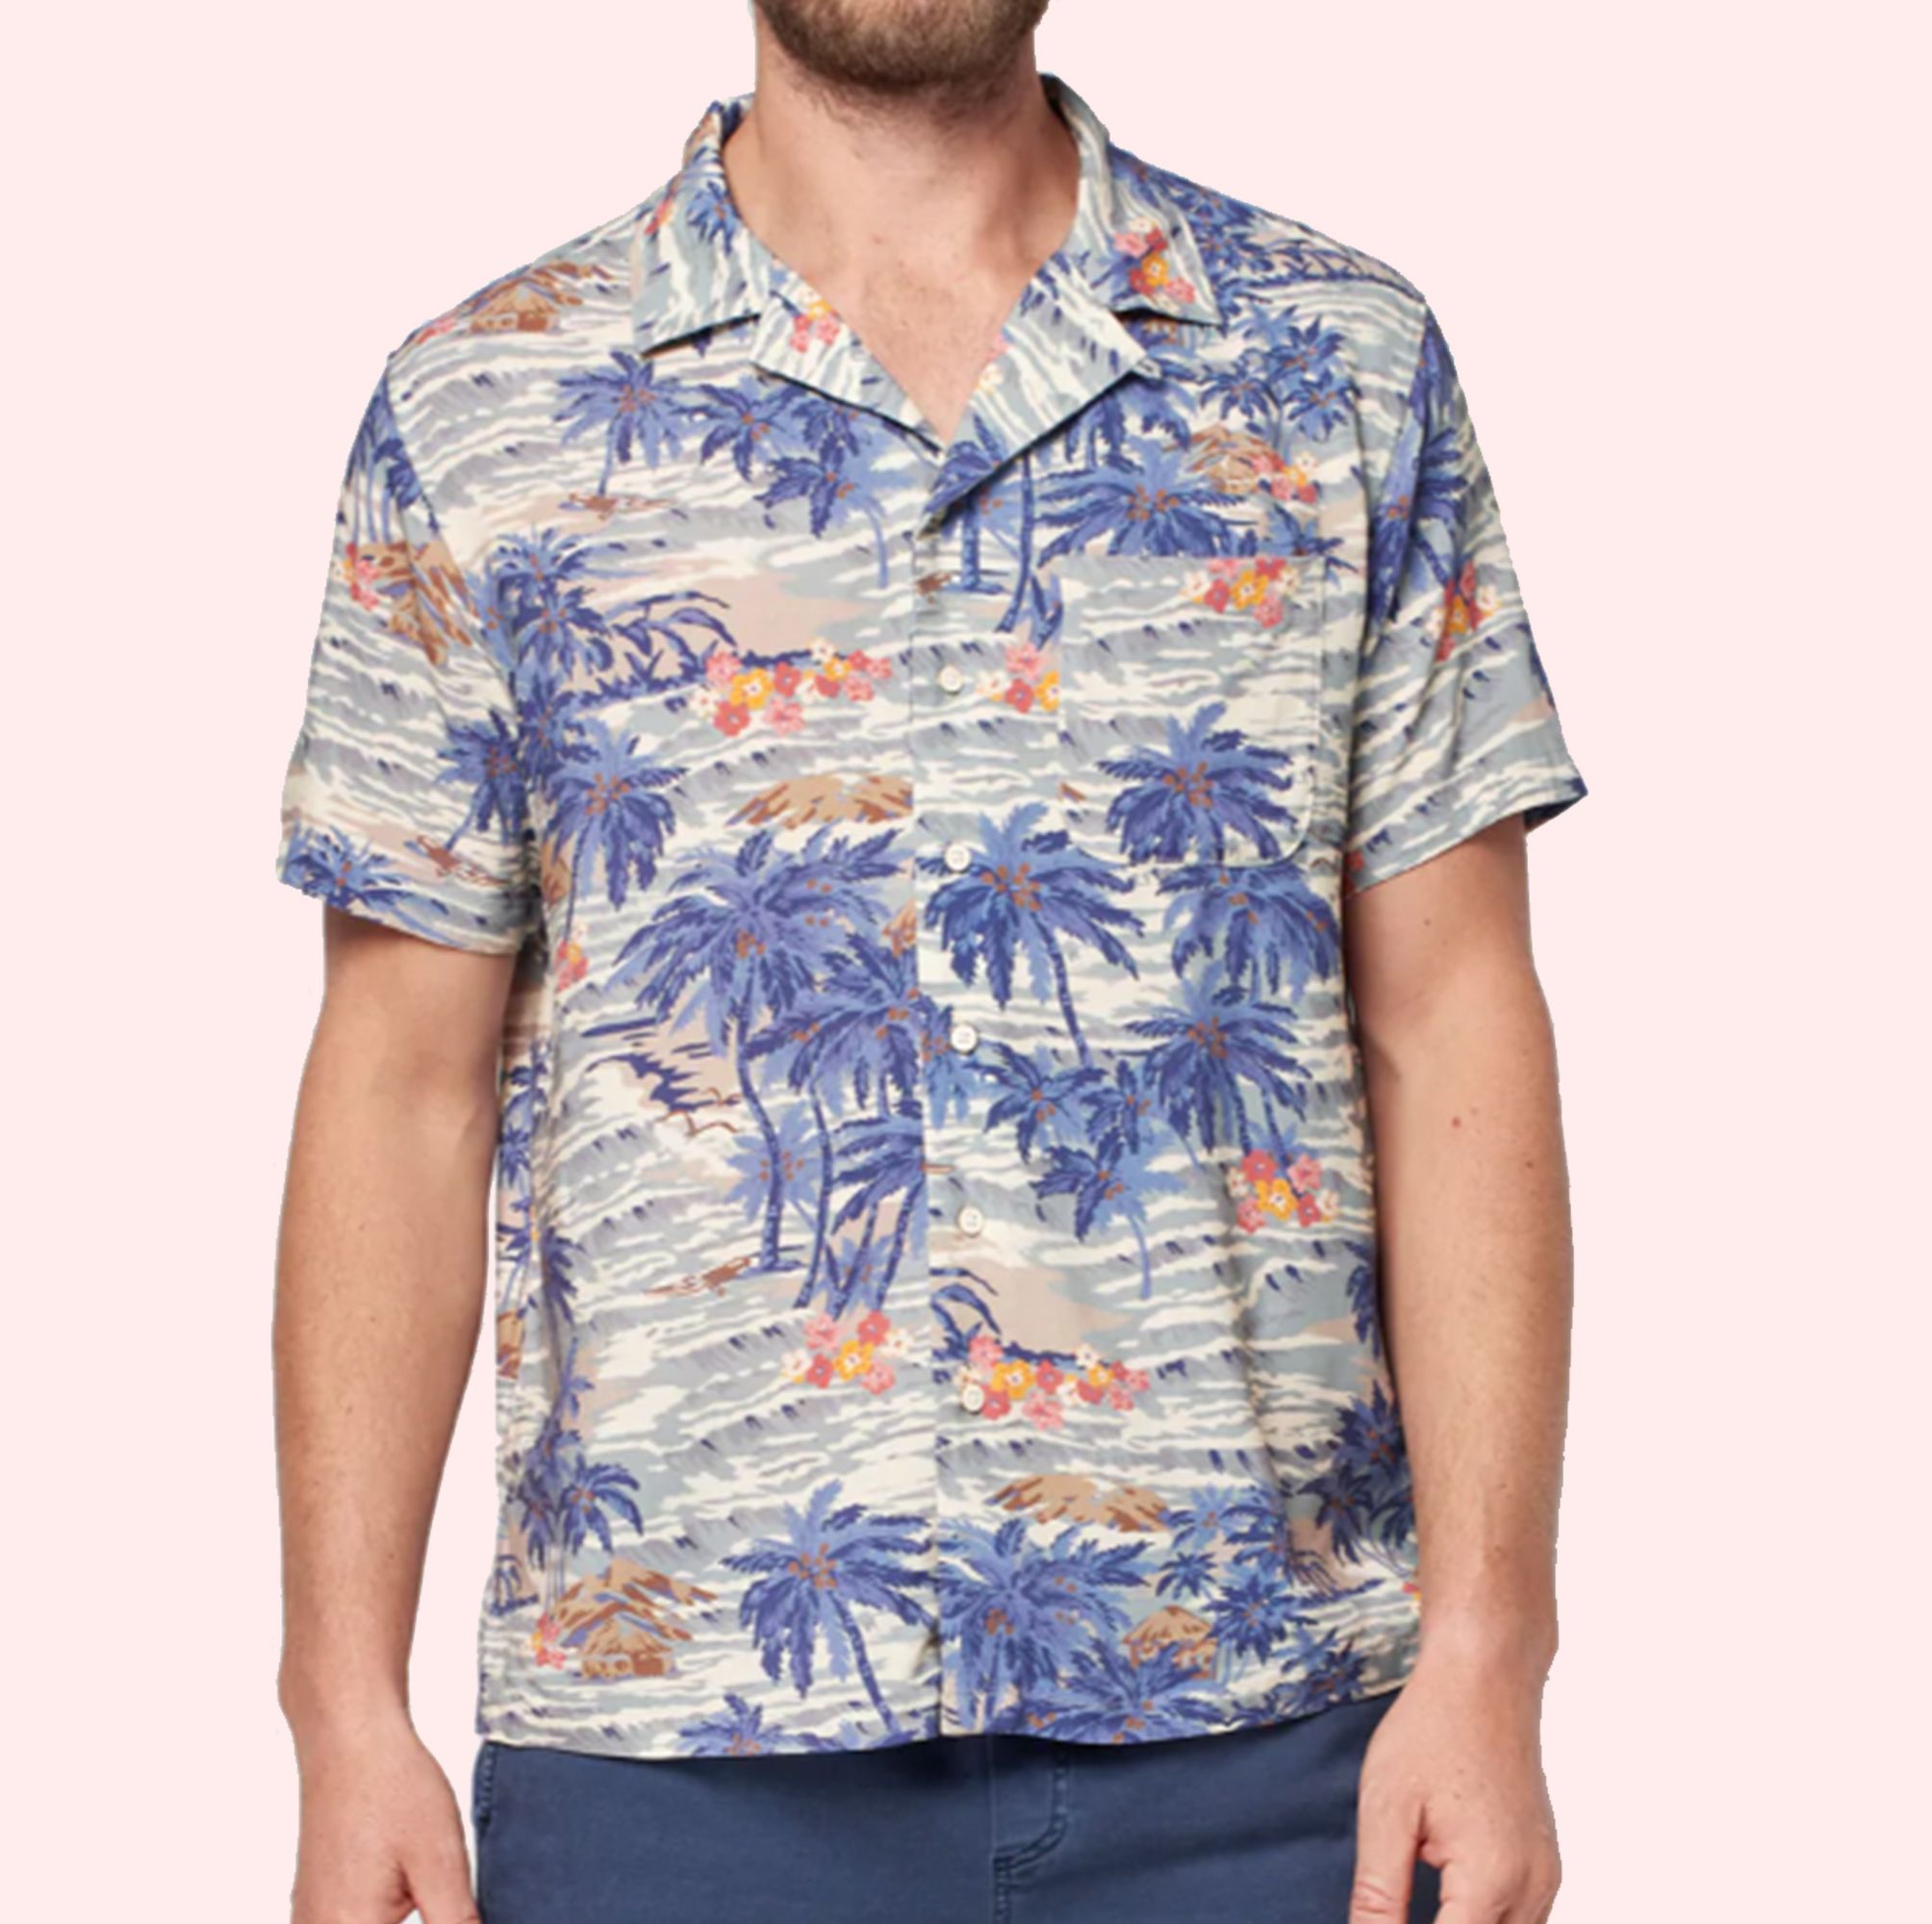 The 22 Best Hawaiian Shirts to Wear With Absolutely Everything This Summer